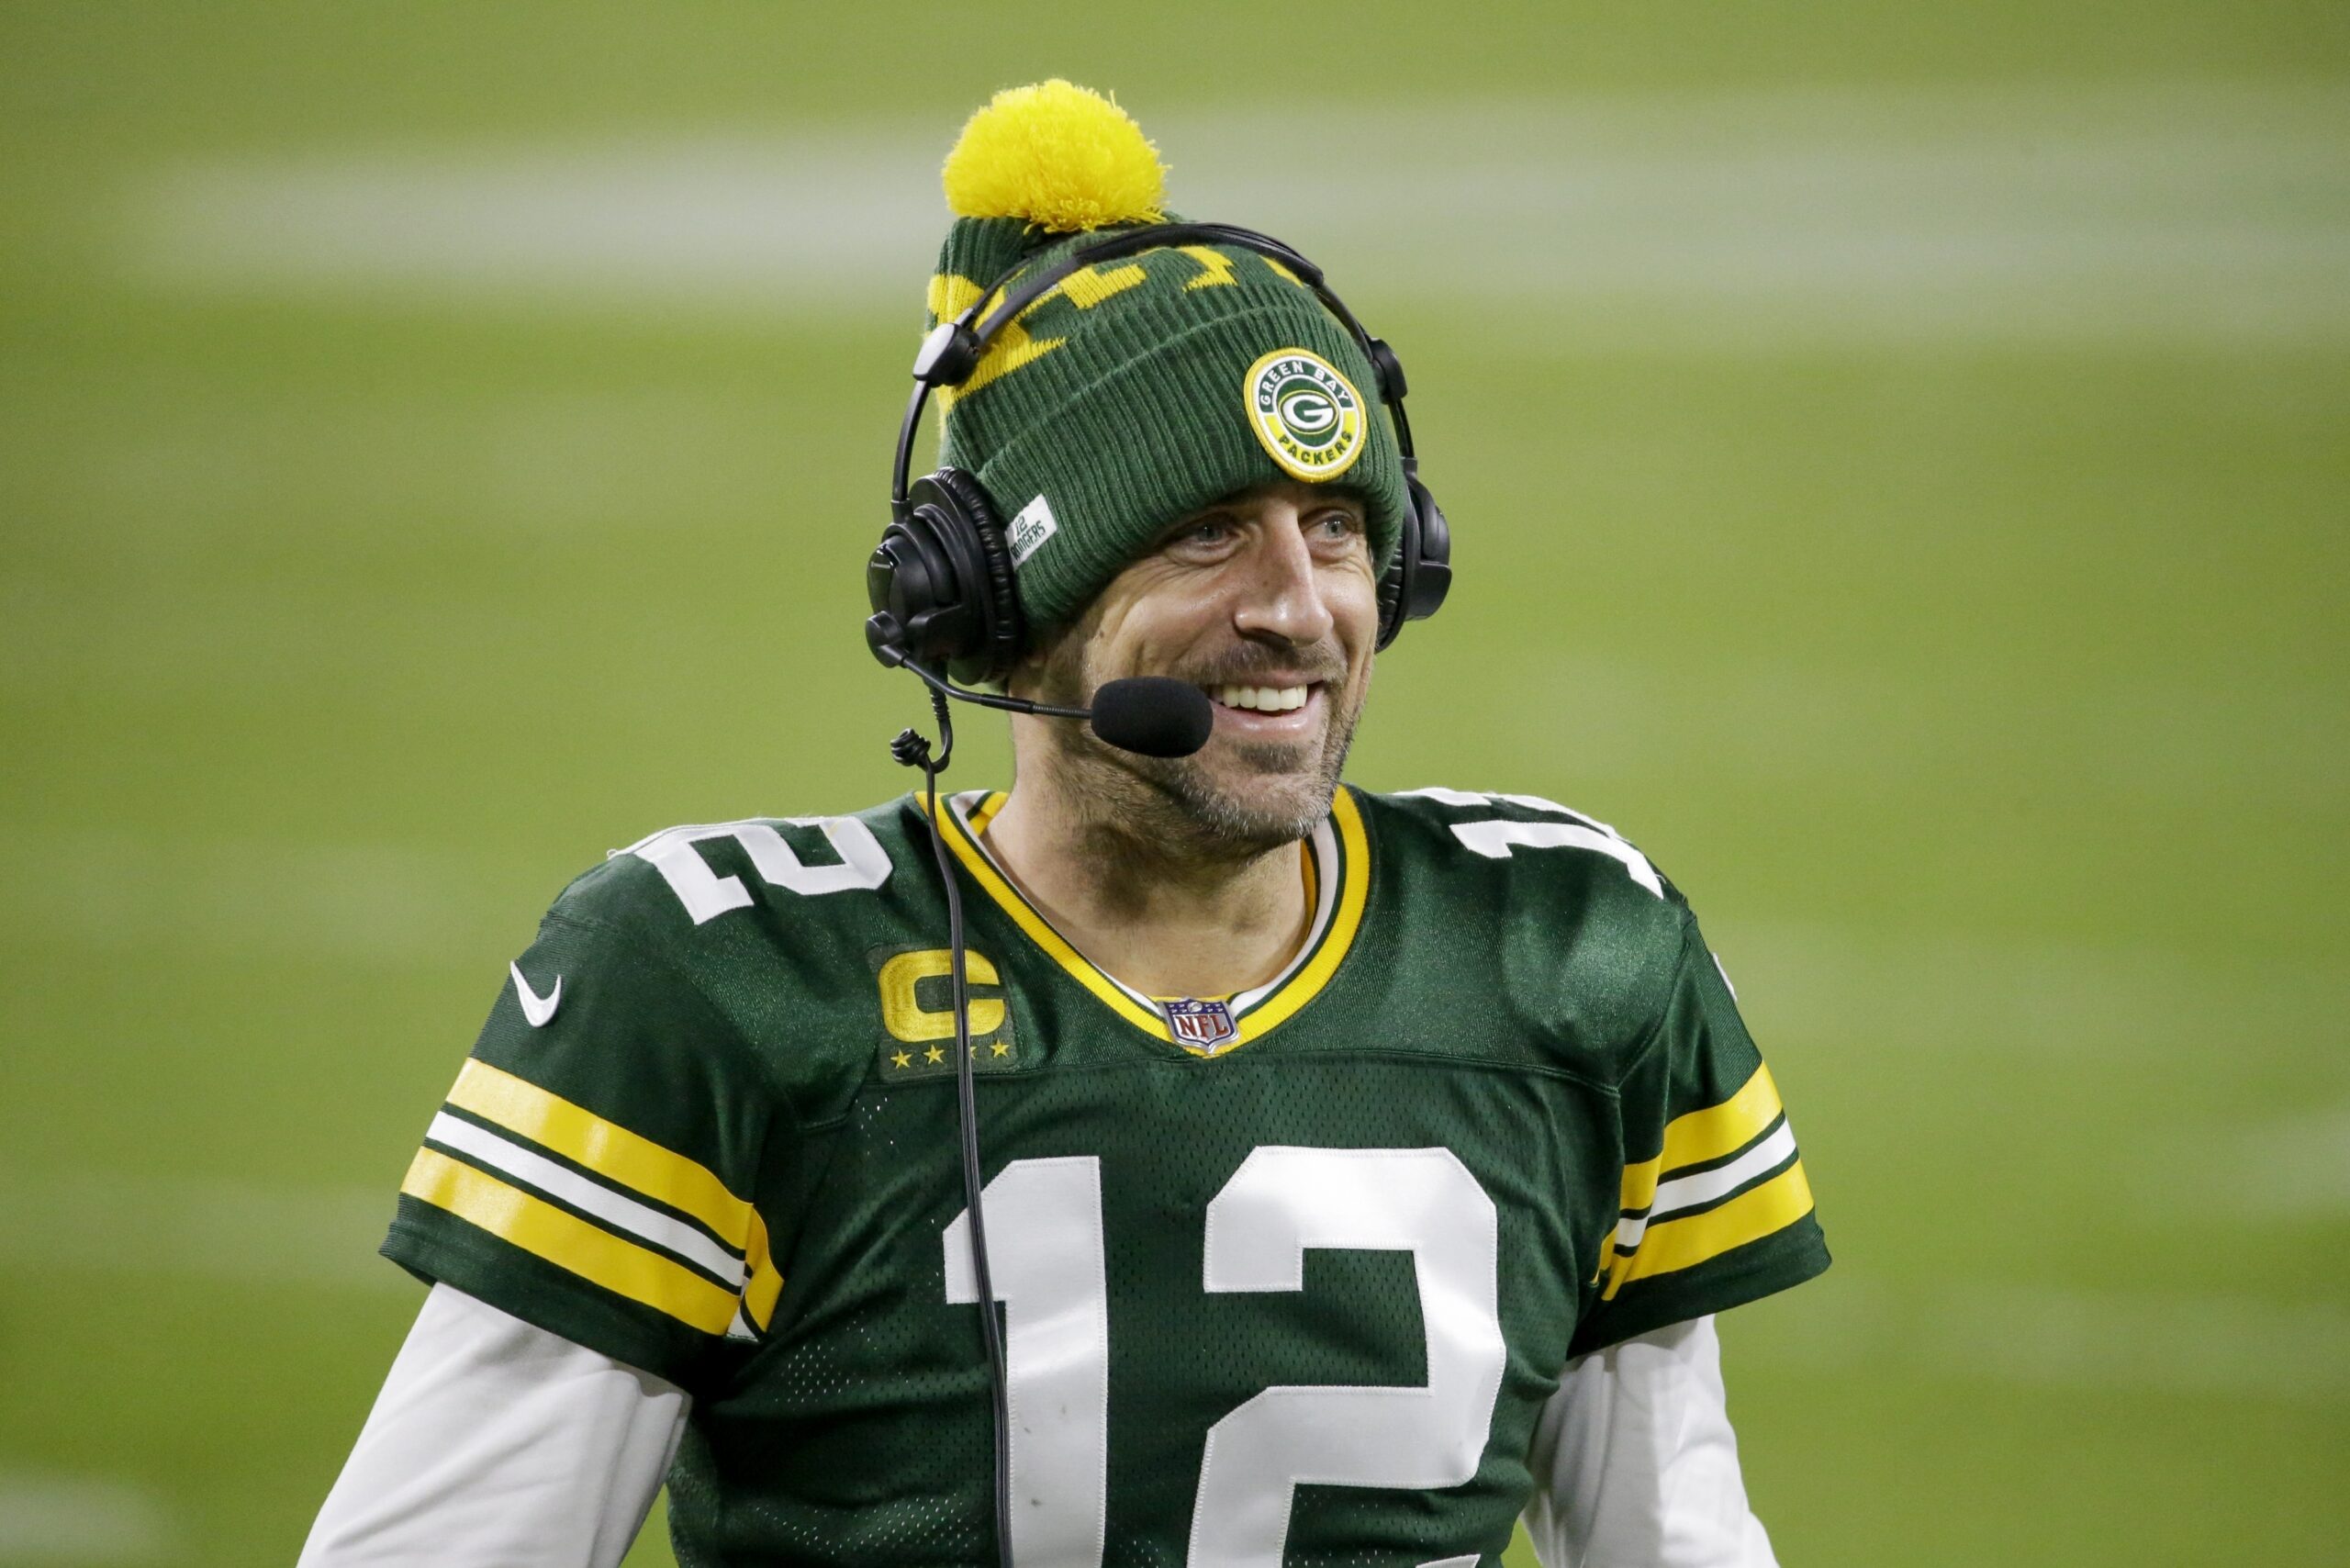 Green Bay Packers' Aaron Rodgers smiles as he is interviewed after an NFL football game